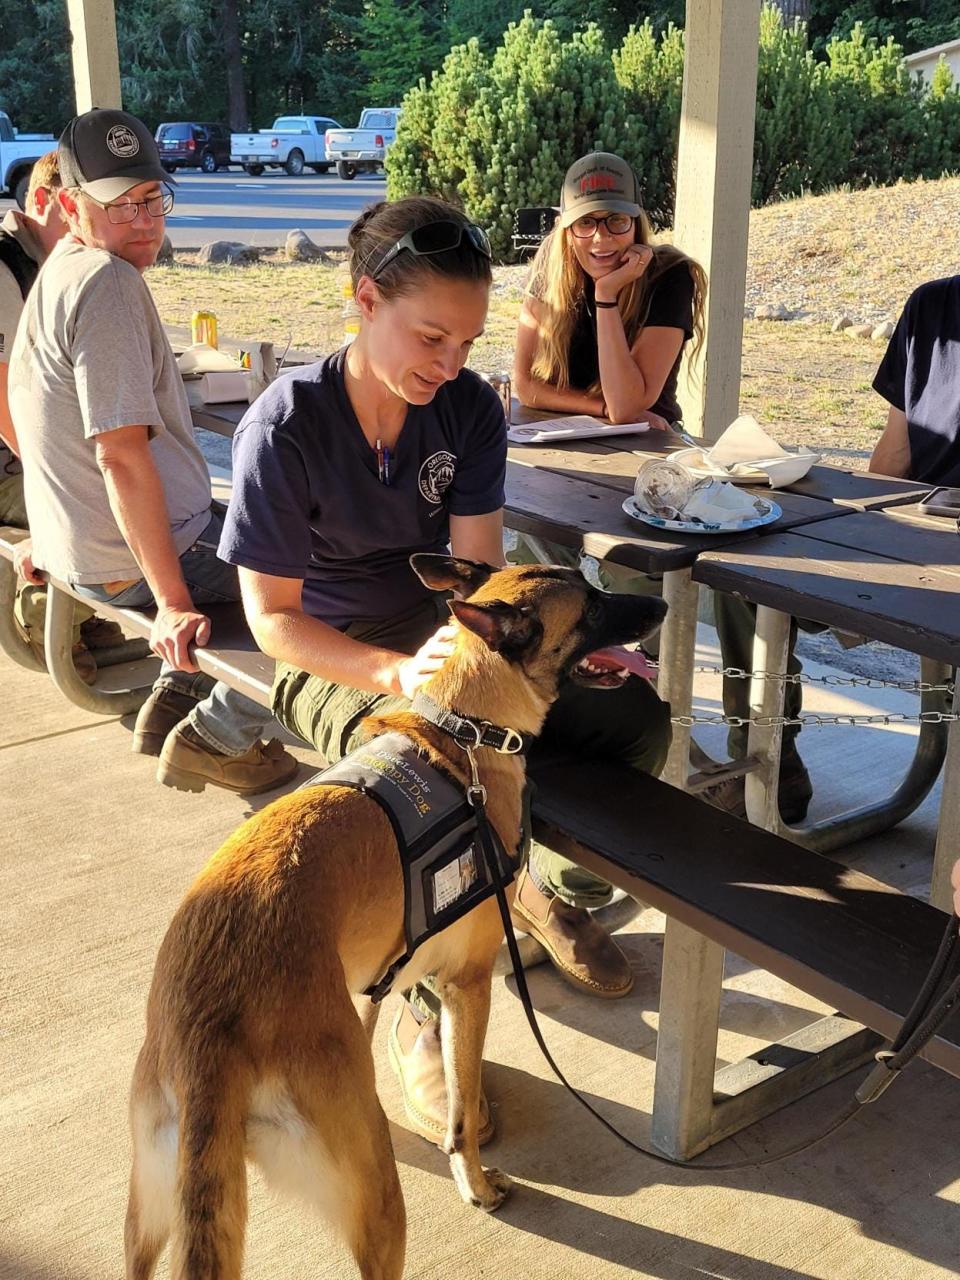 The fire team pets Bliss, the female Belgian Malanois therapy dog from the DoveLewis Portland Area Canine Therapy Team. The dog made an appearance at the fire camp Thursday night.